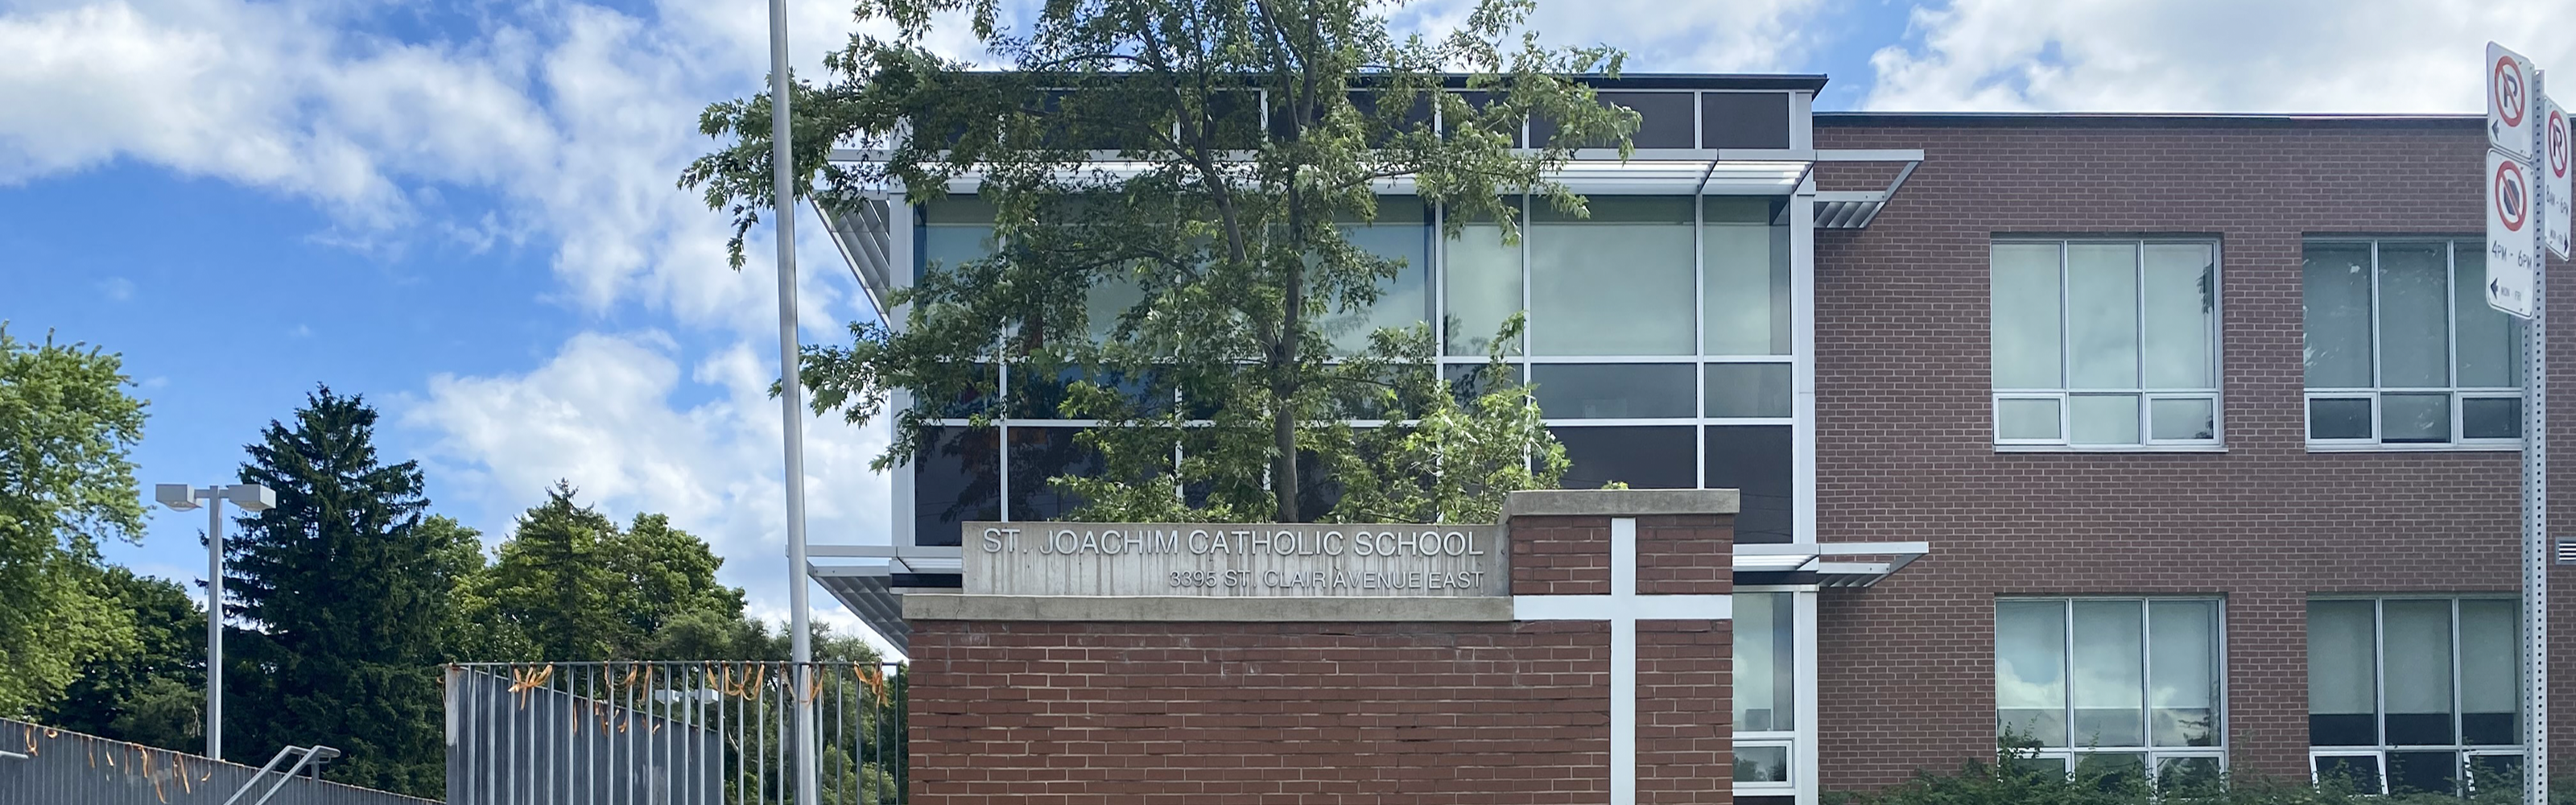 The front of the  St. Joachim Catholic School building.